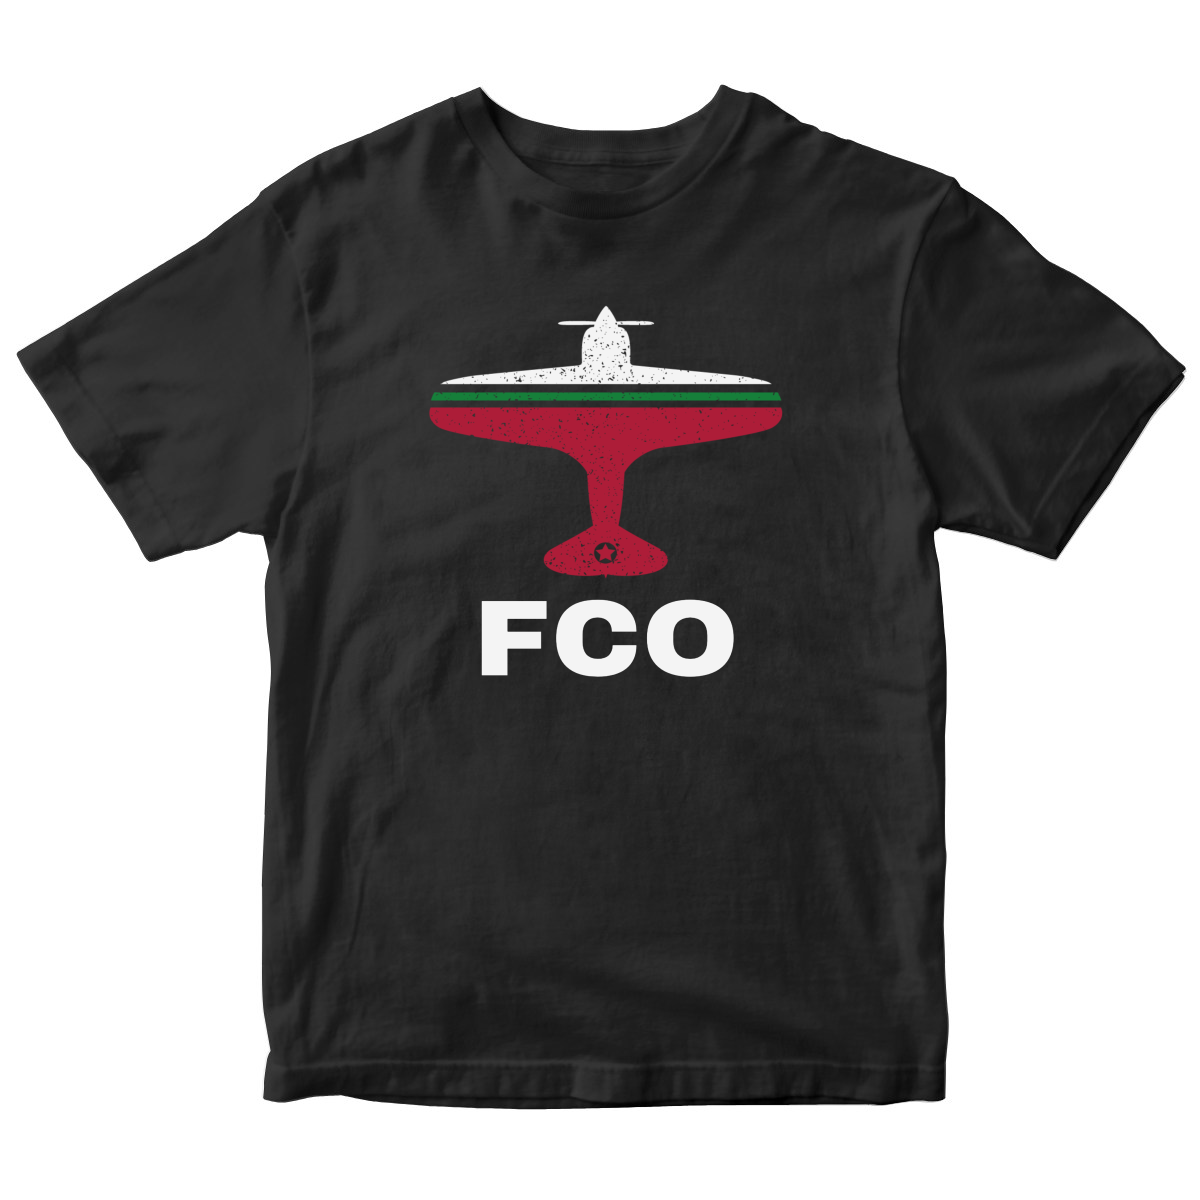 Fly Rome FCO Airport Kids T-shirt | Black